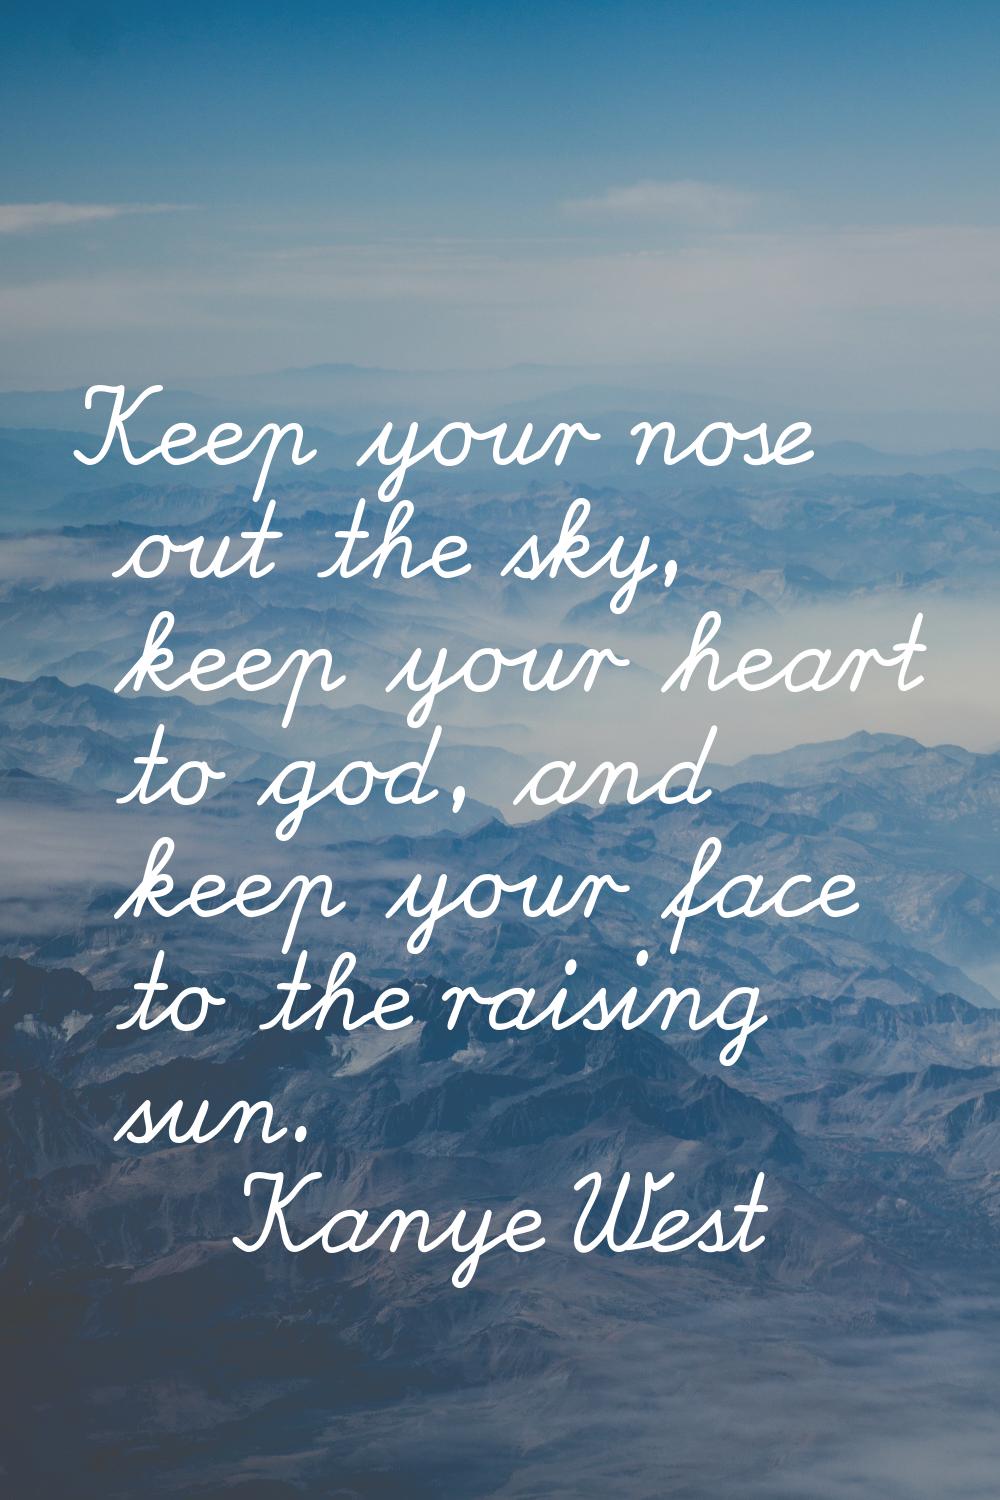 Keep your nose out the sky, keep your heart to god, and keep your face to the raising sun.